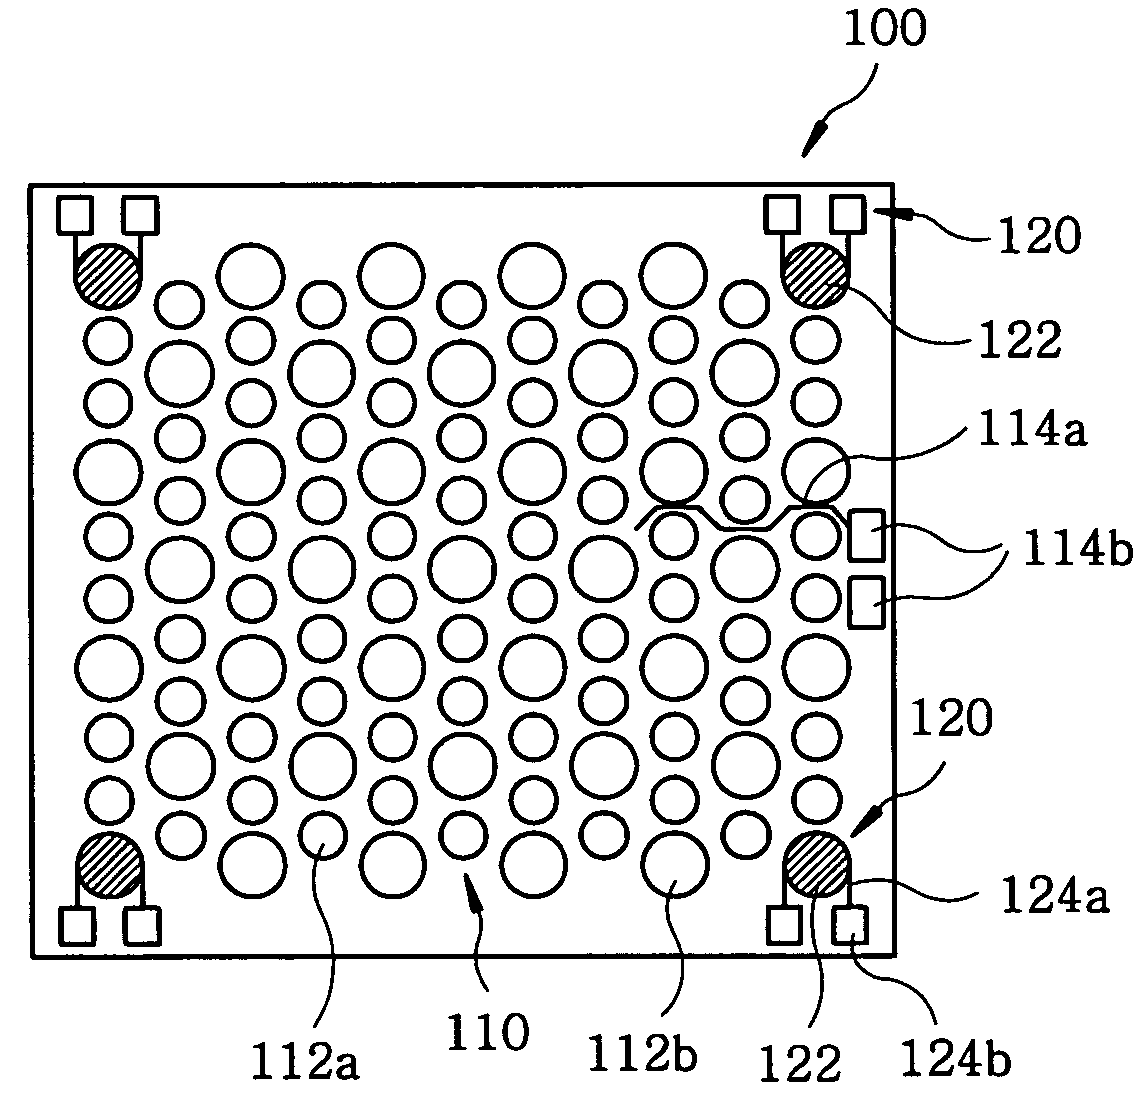 Ultrasonic transducer for ranging measurement with high directionality using parametric transmitting array in air and a method for manufacturing same